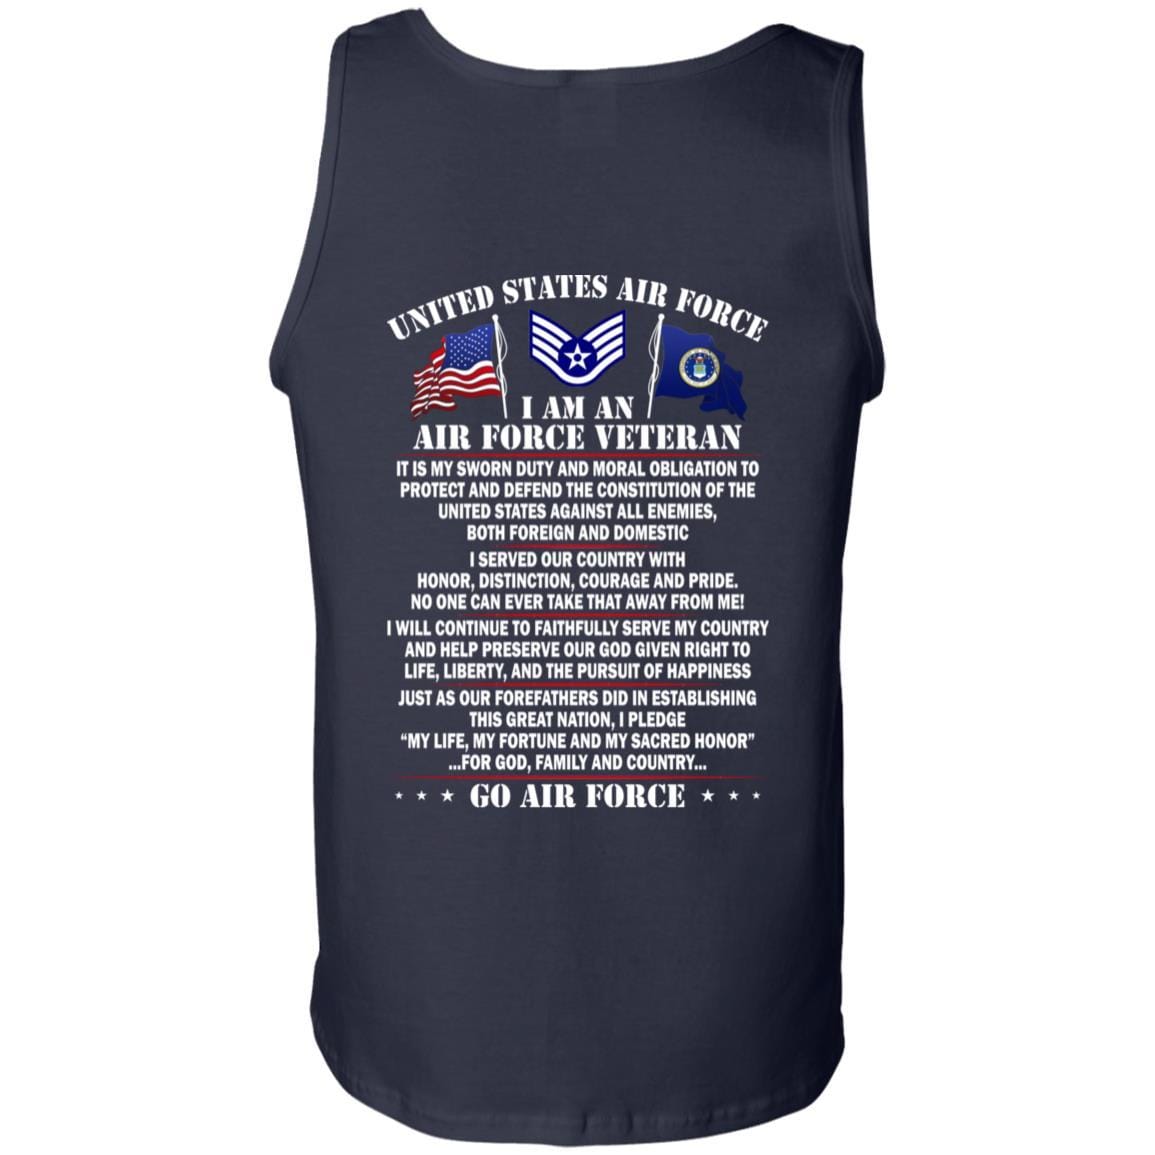 US Air Force E-5 Staff Sergeant SSgt E5 Noncommissioned Officer Ranks AF Rank - Go Air Force T-Shirt On Back-TShirt-USAF-Veterans Nation